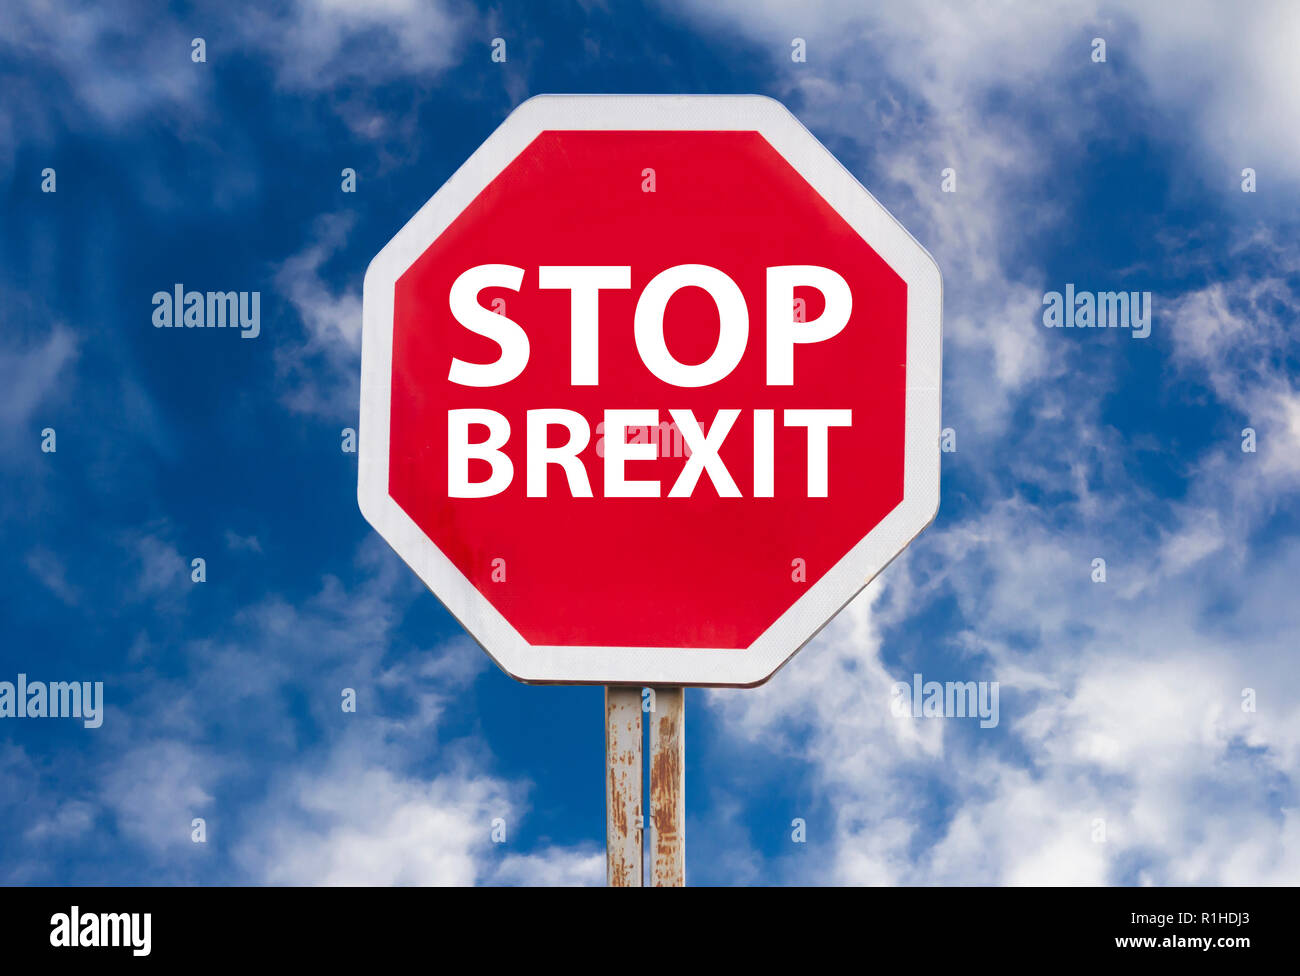 stop brexit sign over blue sky background Stock Photo